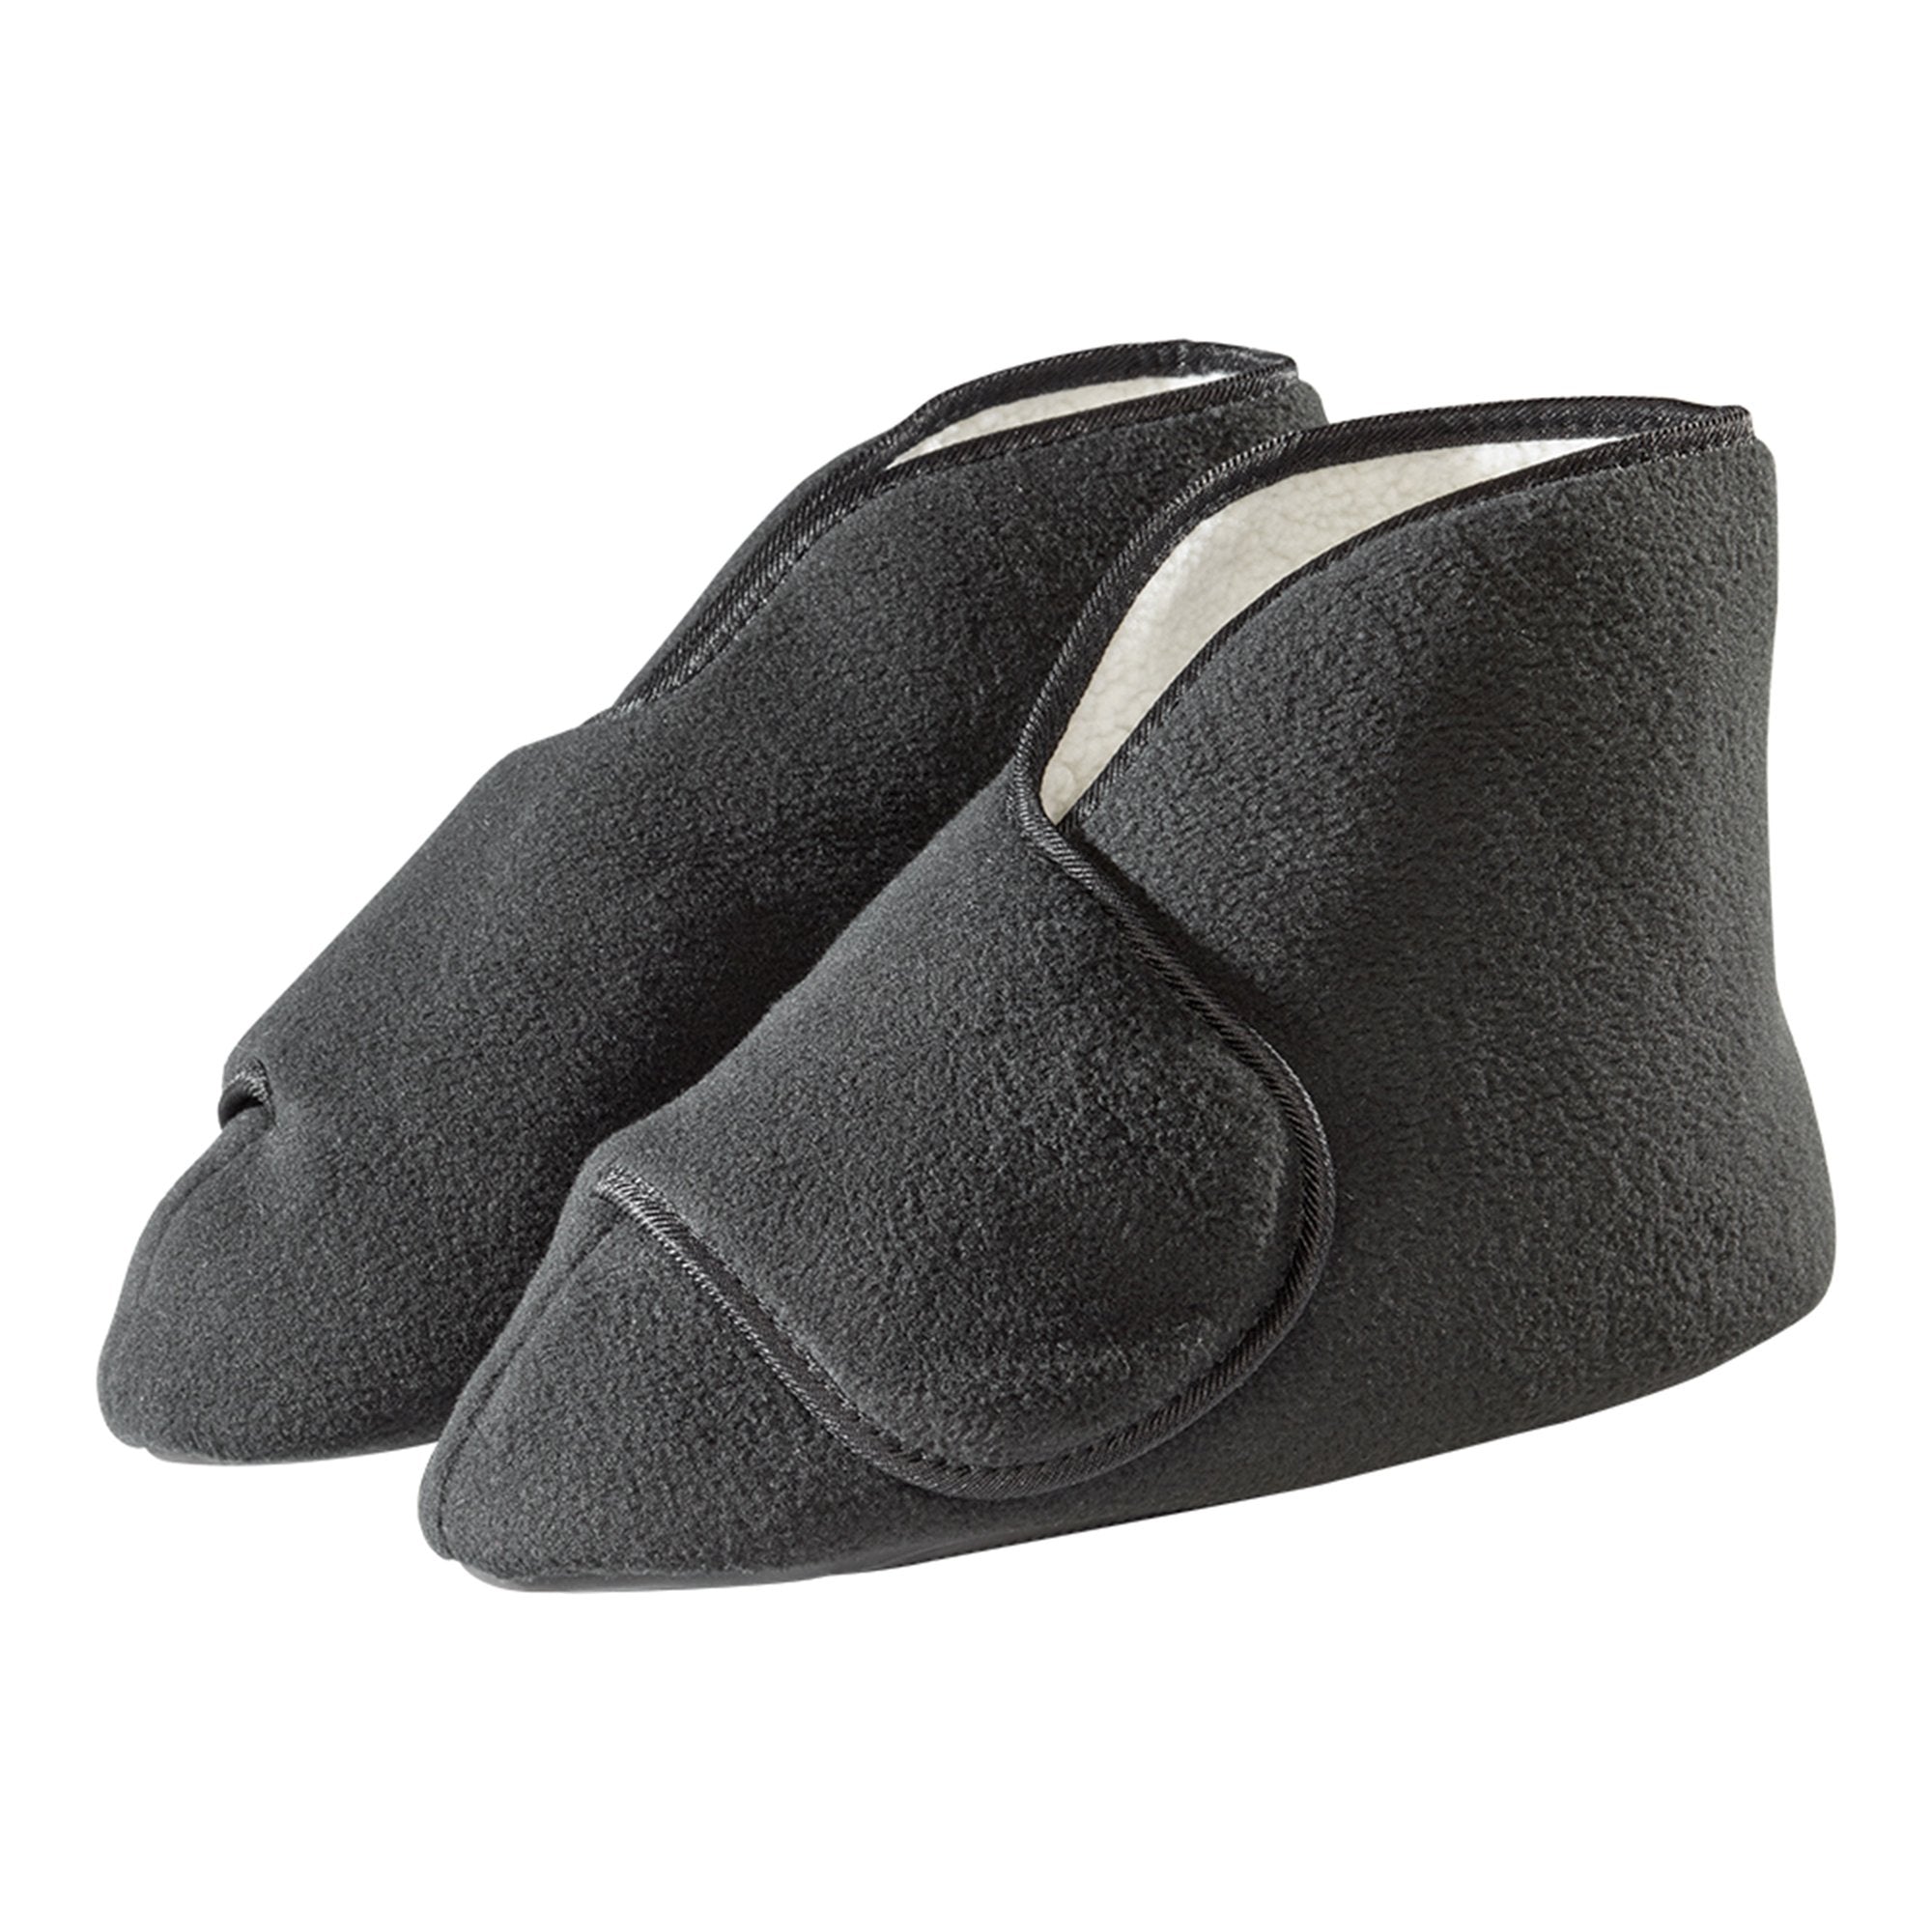 Diabetic Bootie Slippers Silverts® Medium / X-Wide Black Ankle High